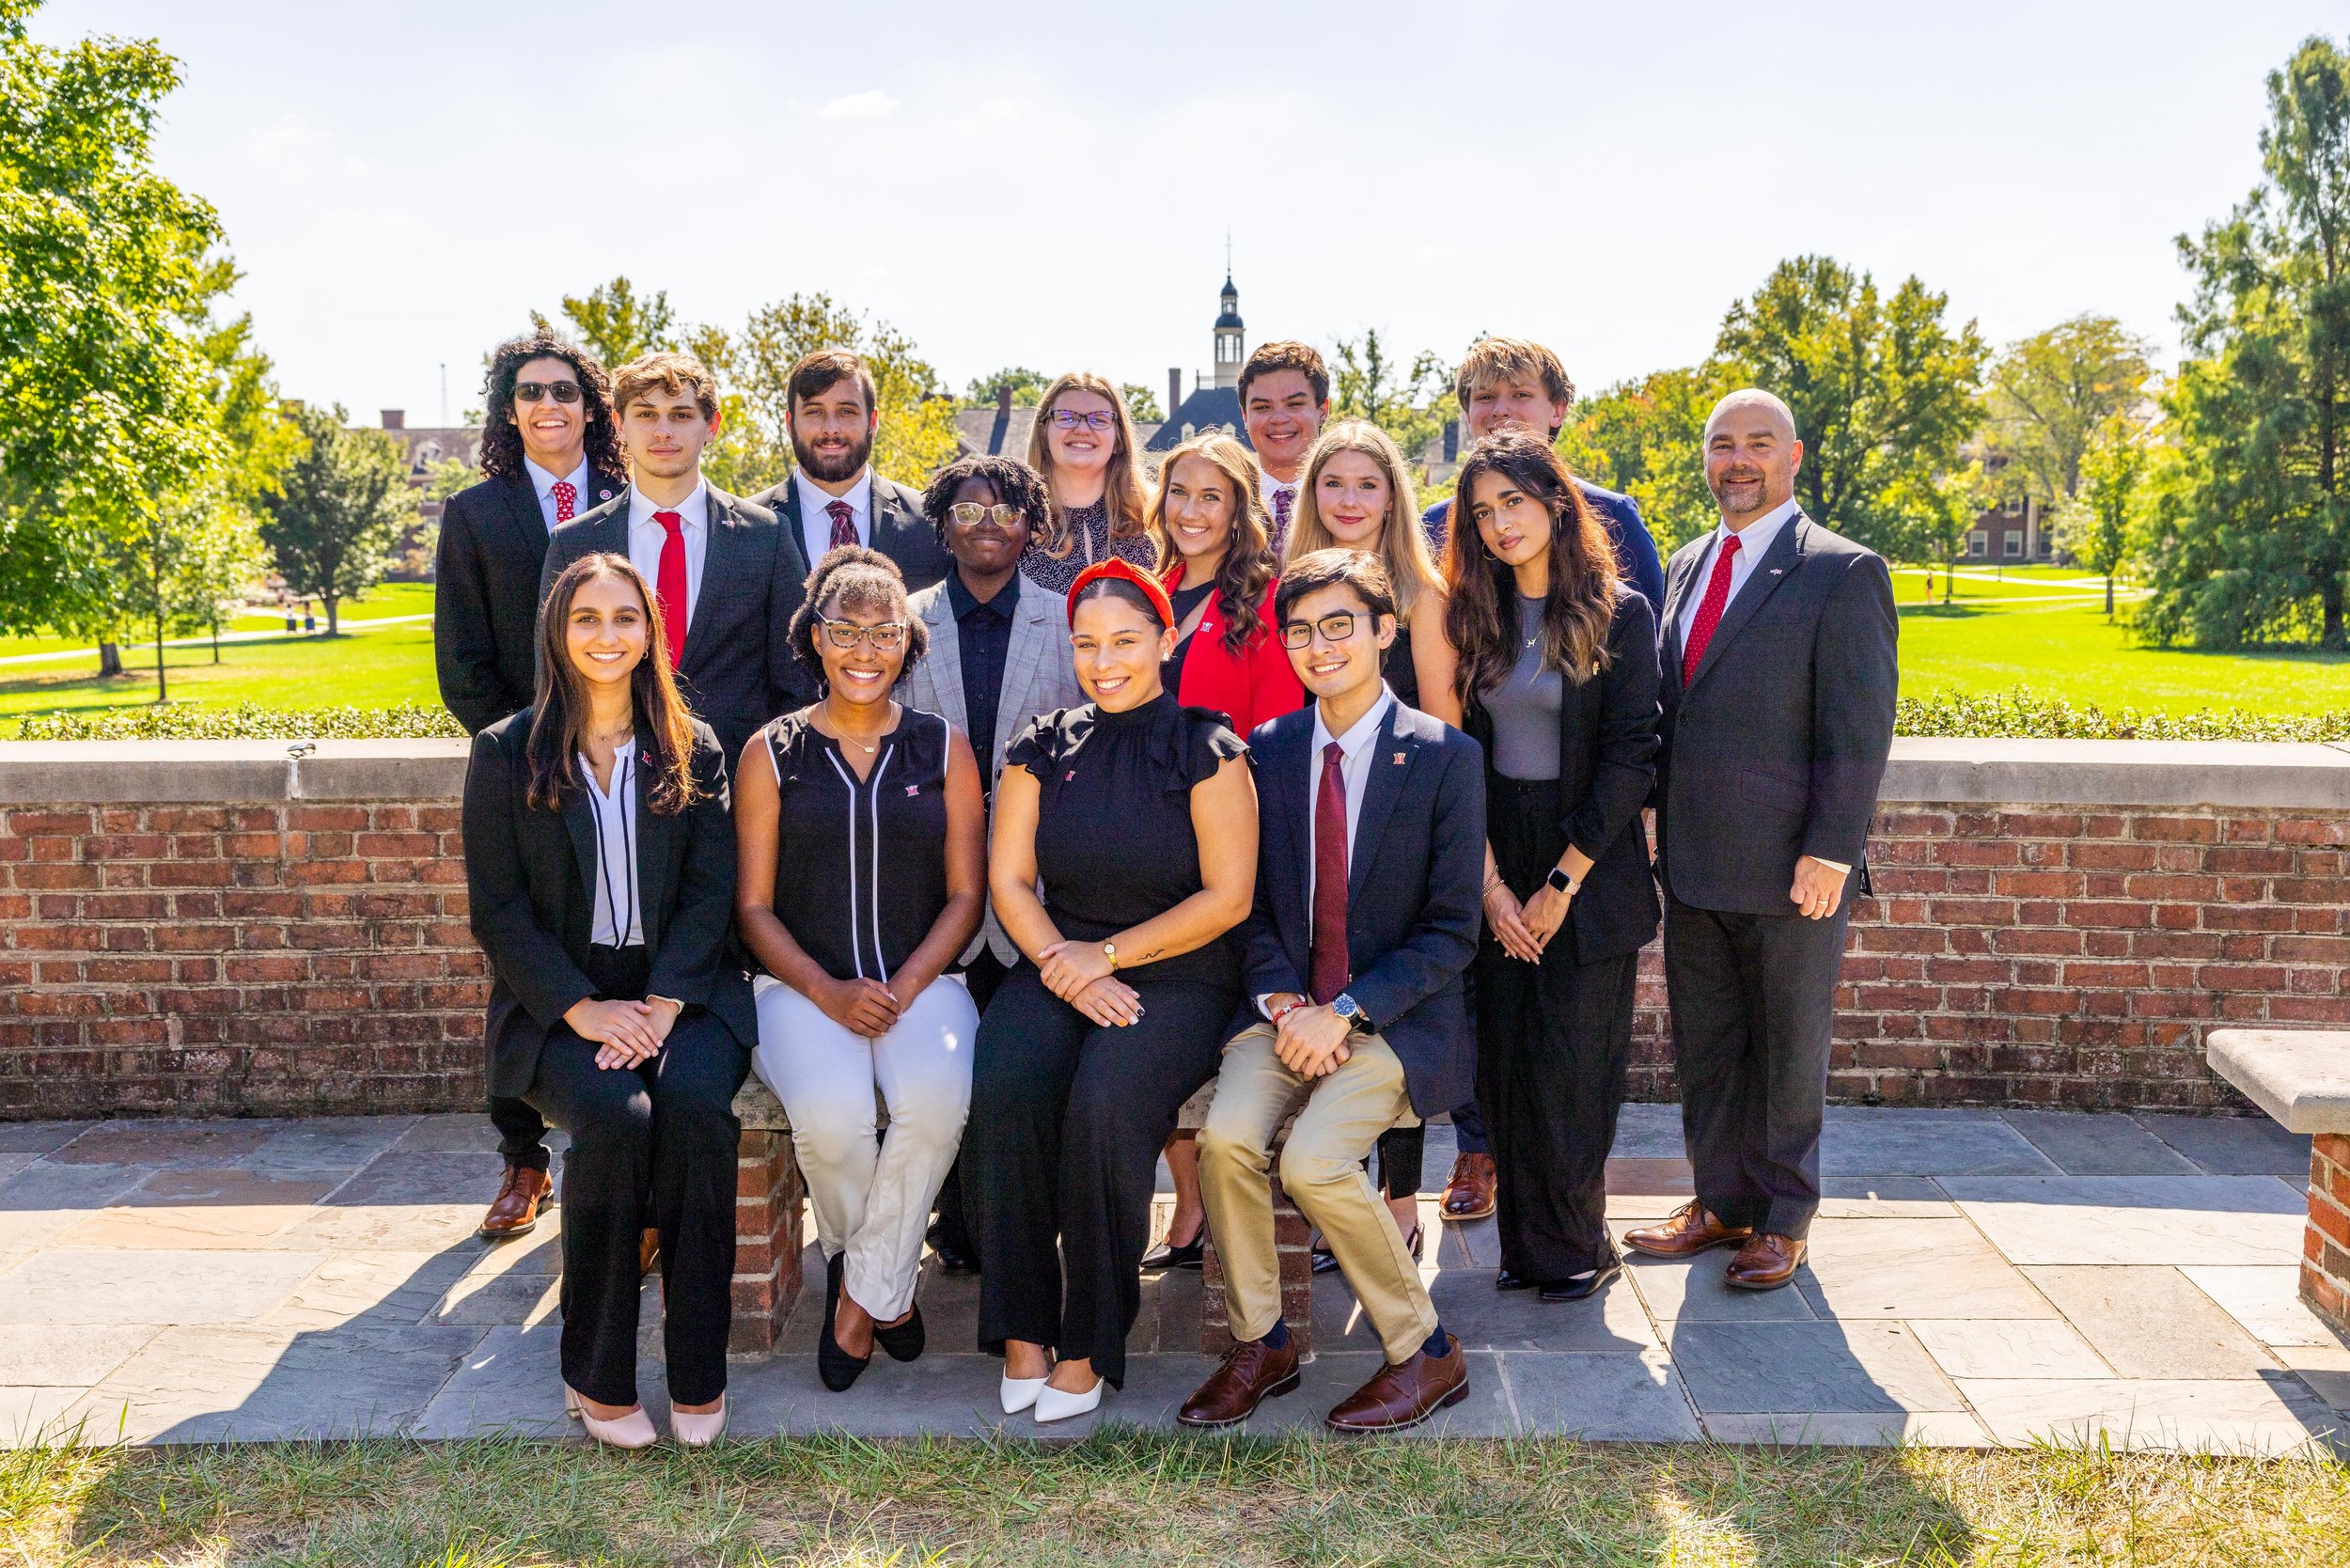 Associated Student Government